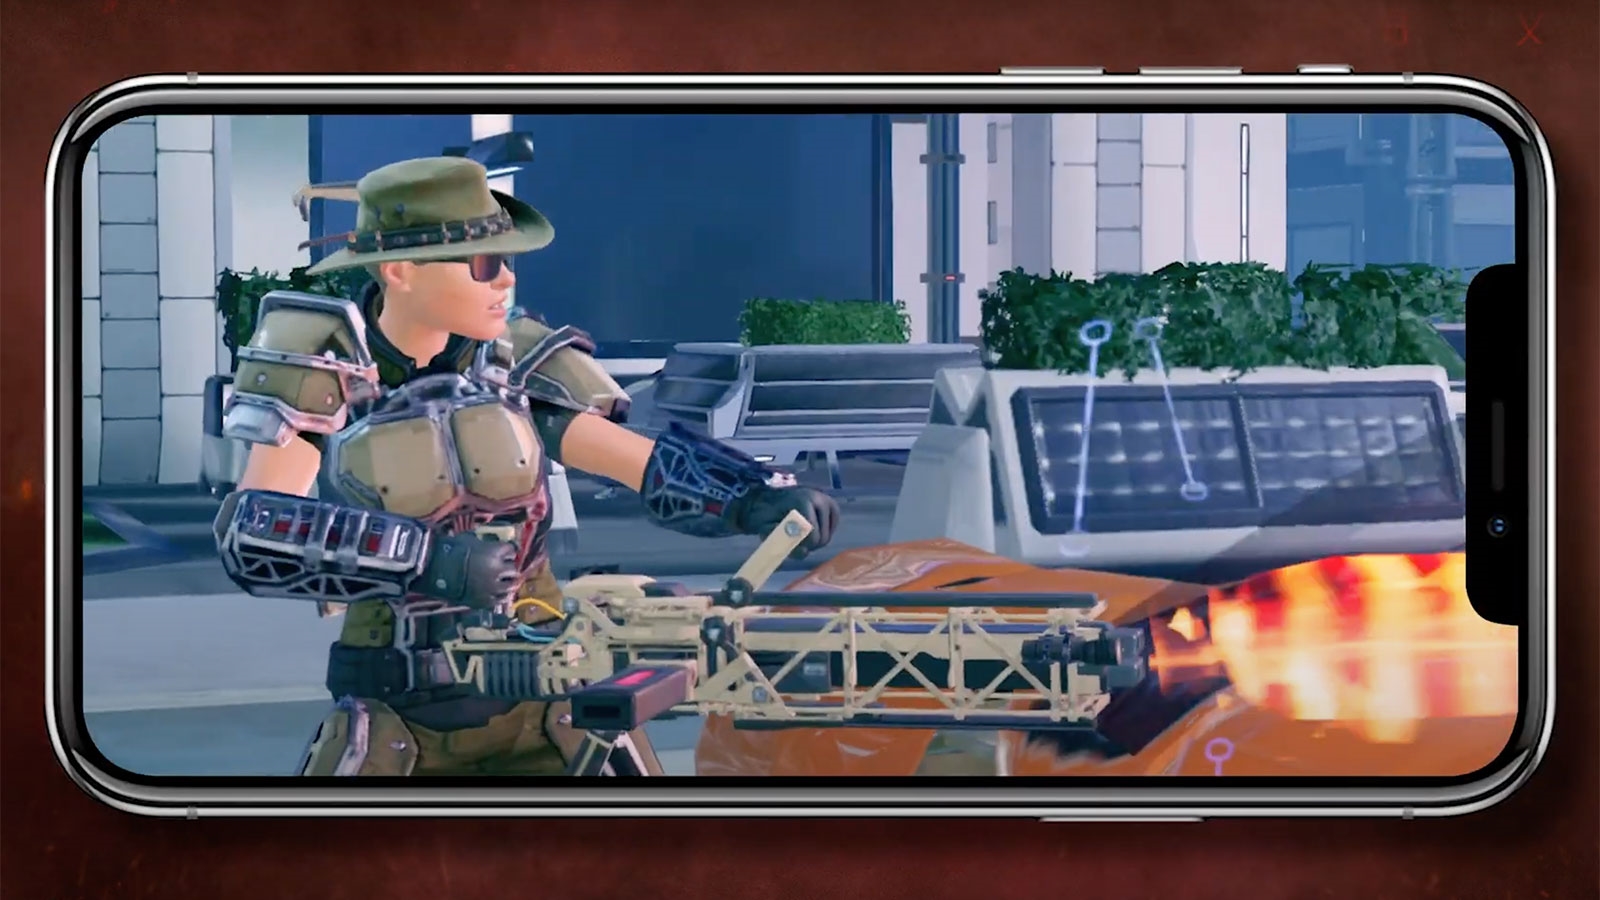 The 'XCOM 2' saga is now available on your iPhone or iPad | DeviceDaily.com